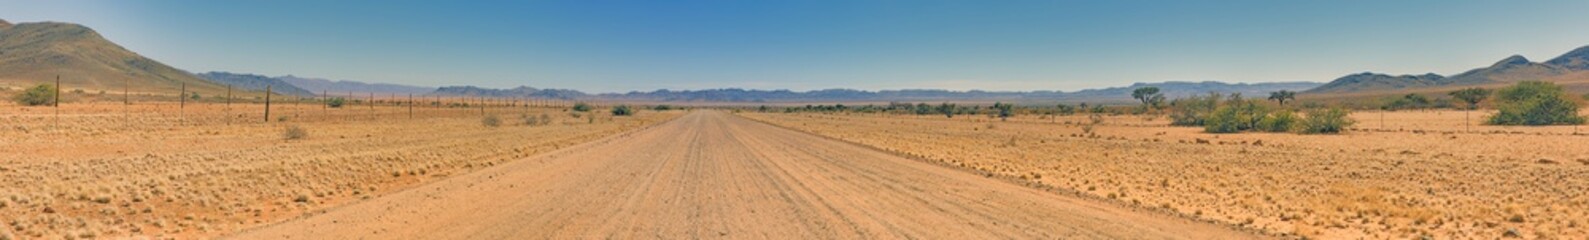 Panoramic picture over a gravel road through the desert like steppe with red sand in southern...